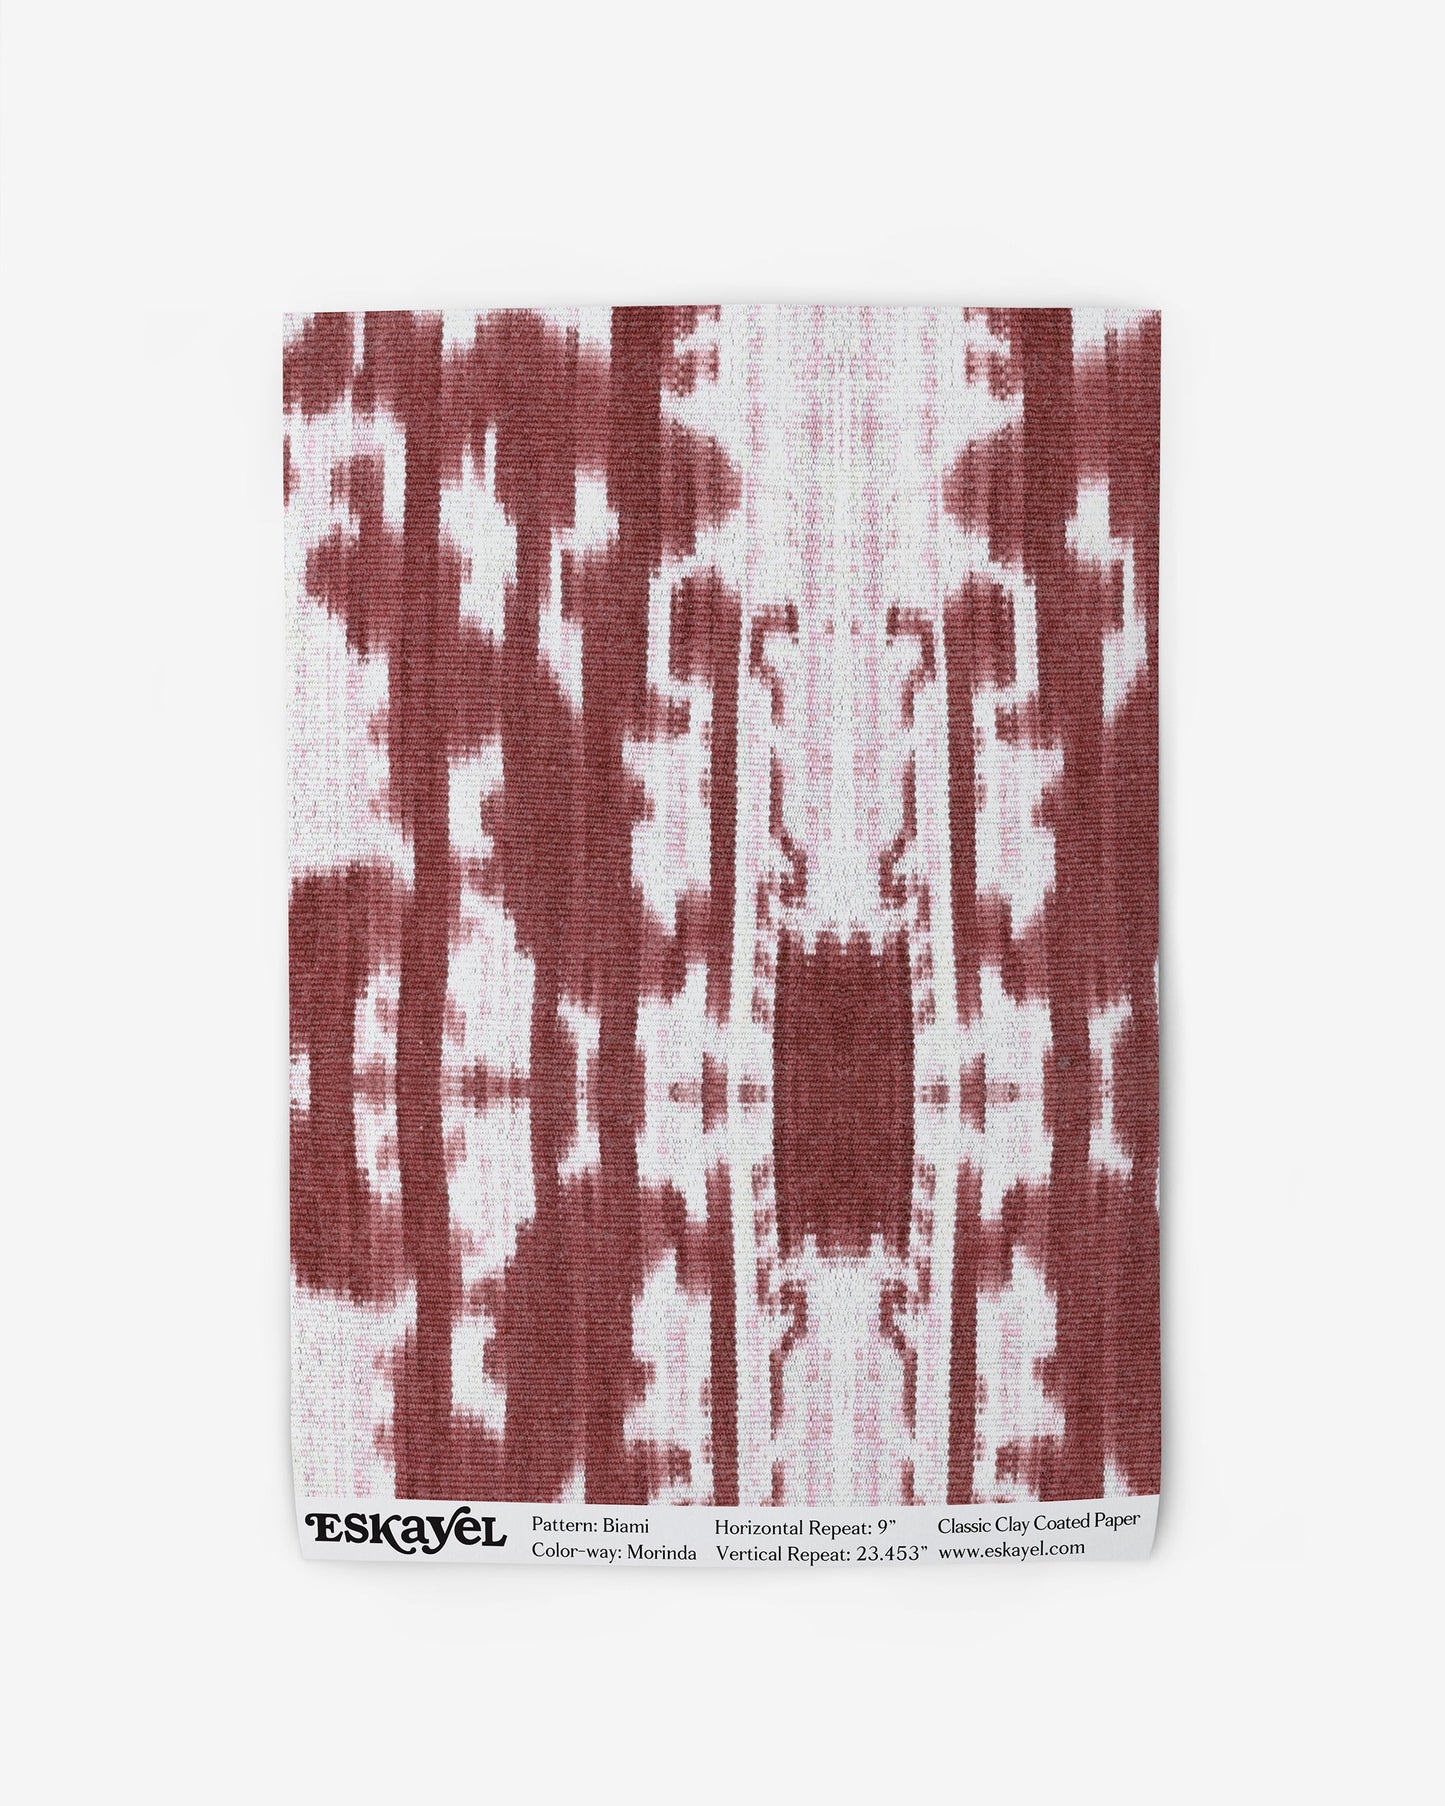 A red and white handkerchief with a Biami Wallpaper||Morinda Ikat pattern on it.